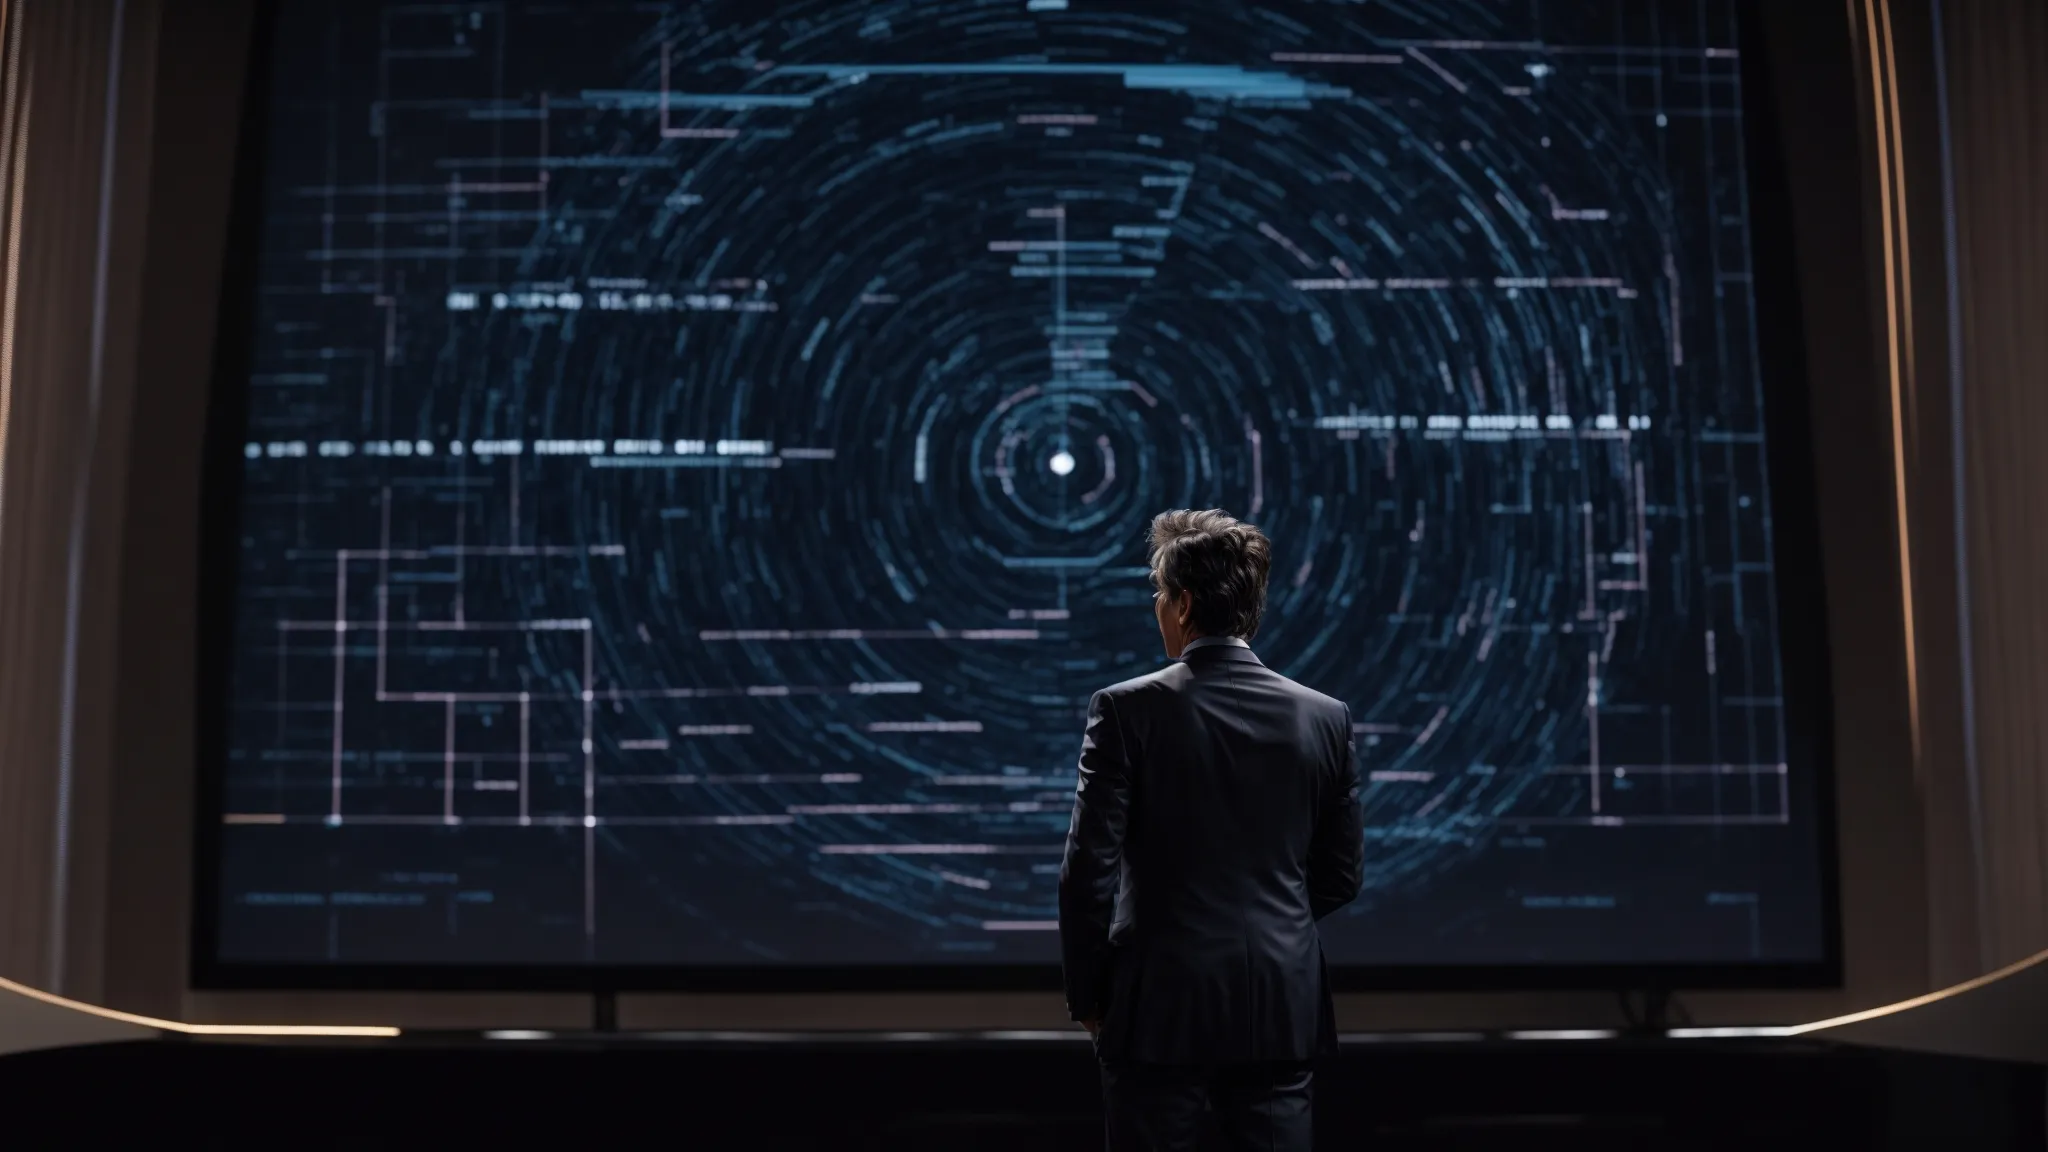 ben stiller, in a crisp suit, confidently points to a large, glowing, abstract representation of an algorithm on a screen during a tech presentation.